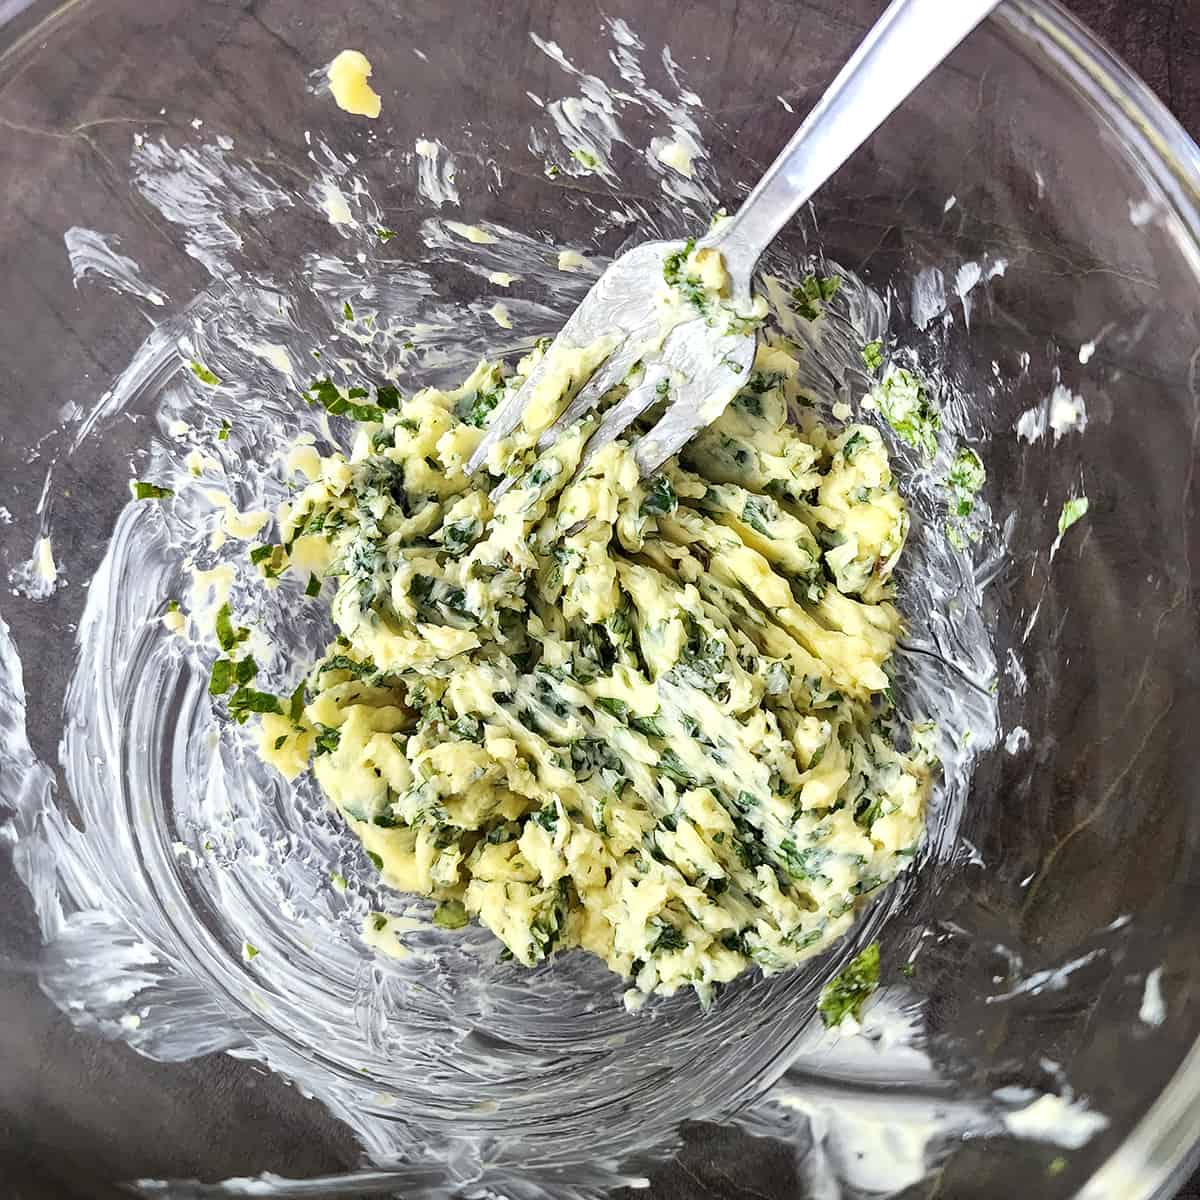 Making of herb butter, 